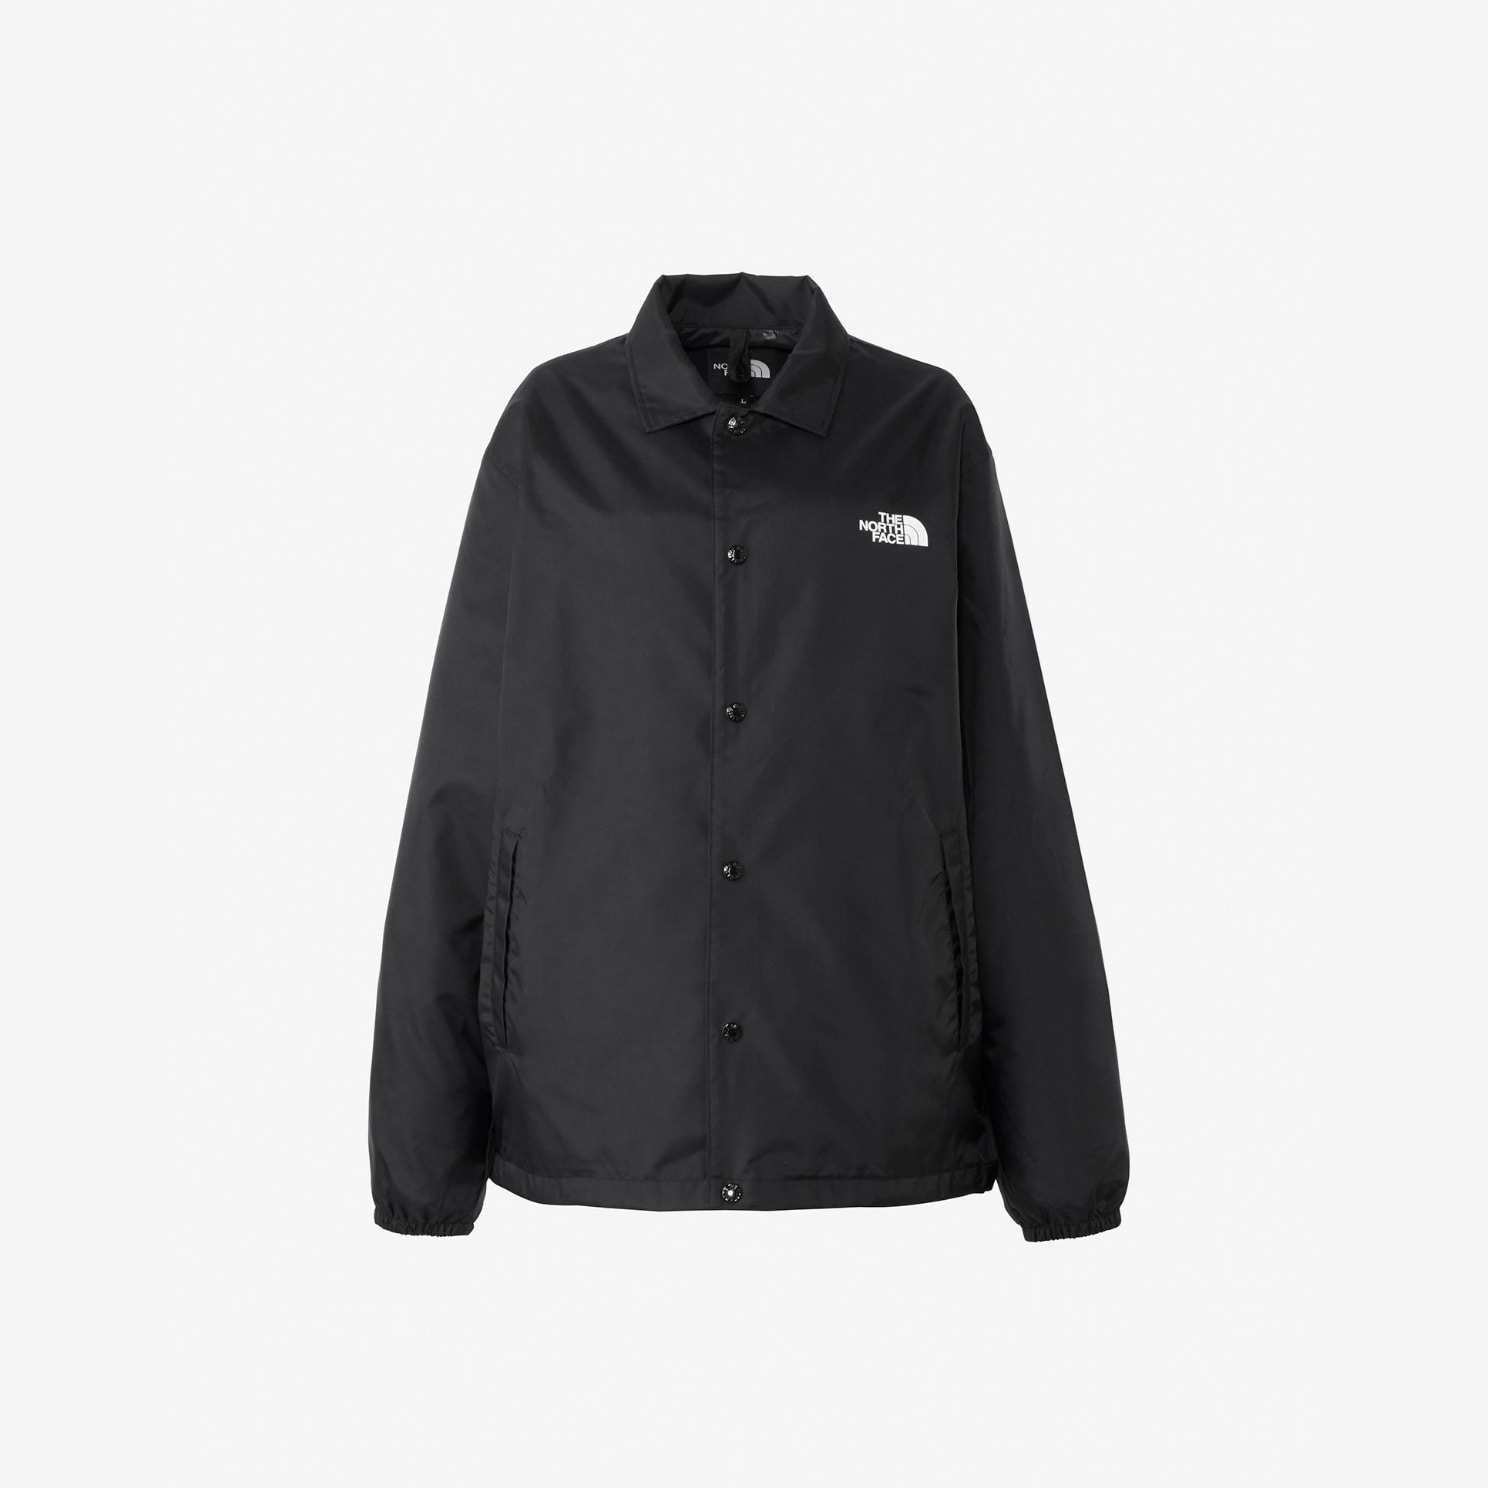 THE NORTH FACE NEVER STOP ING The Coach Jacket